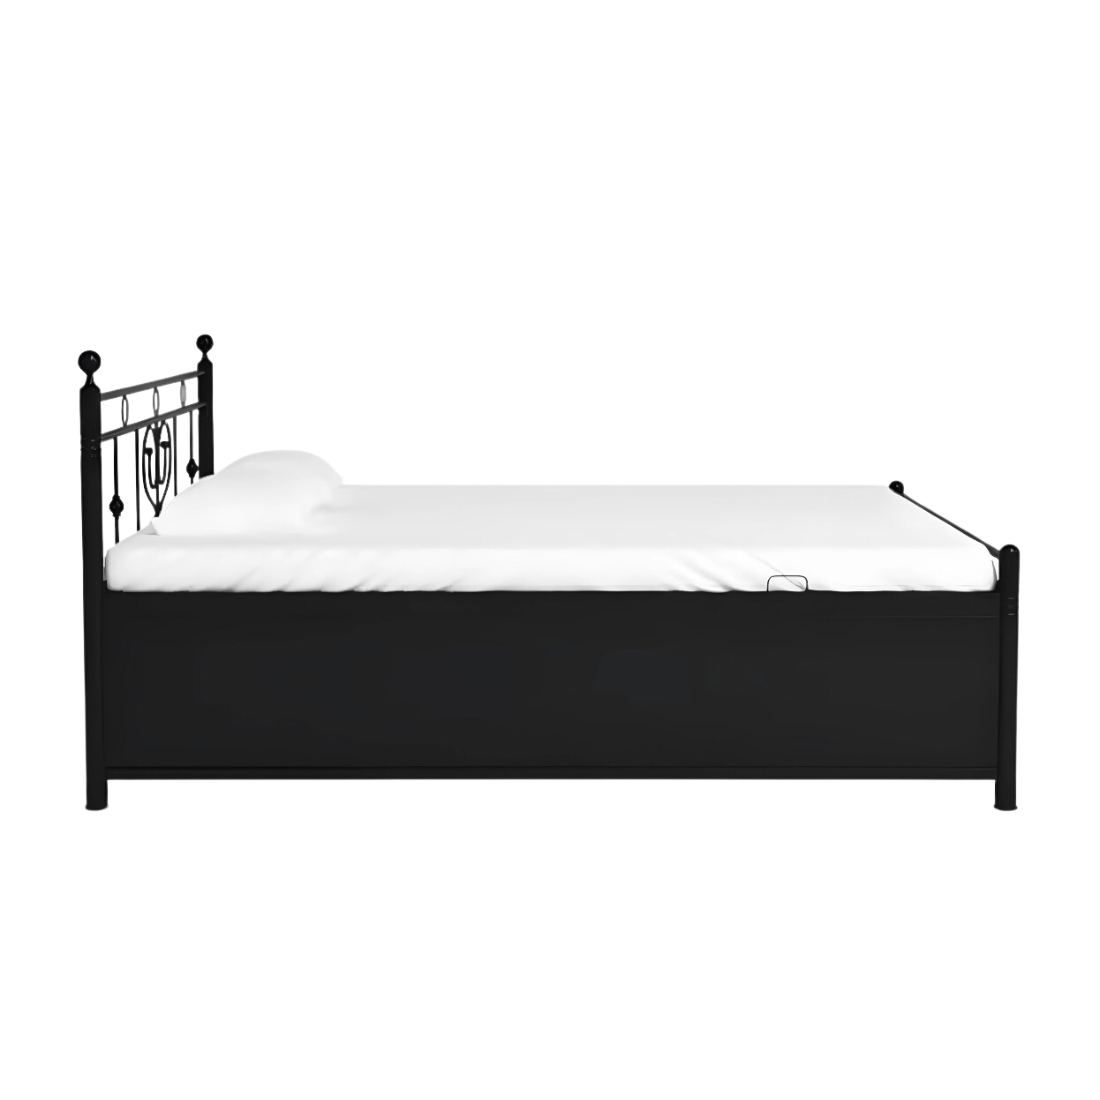 Dustin Hydraulic Storage Double Metal Bed (Color - Black) with Designer Headrest